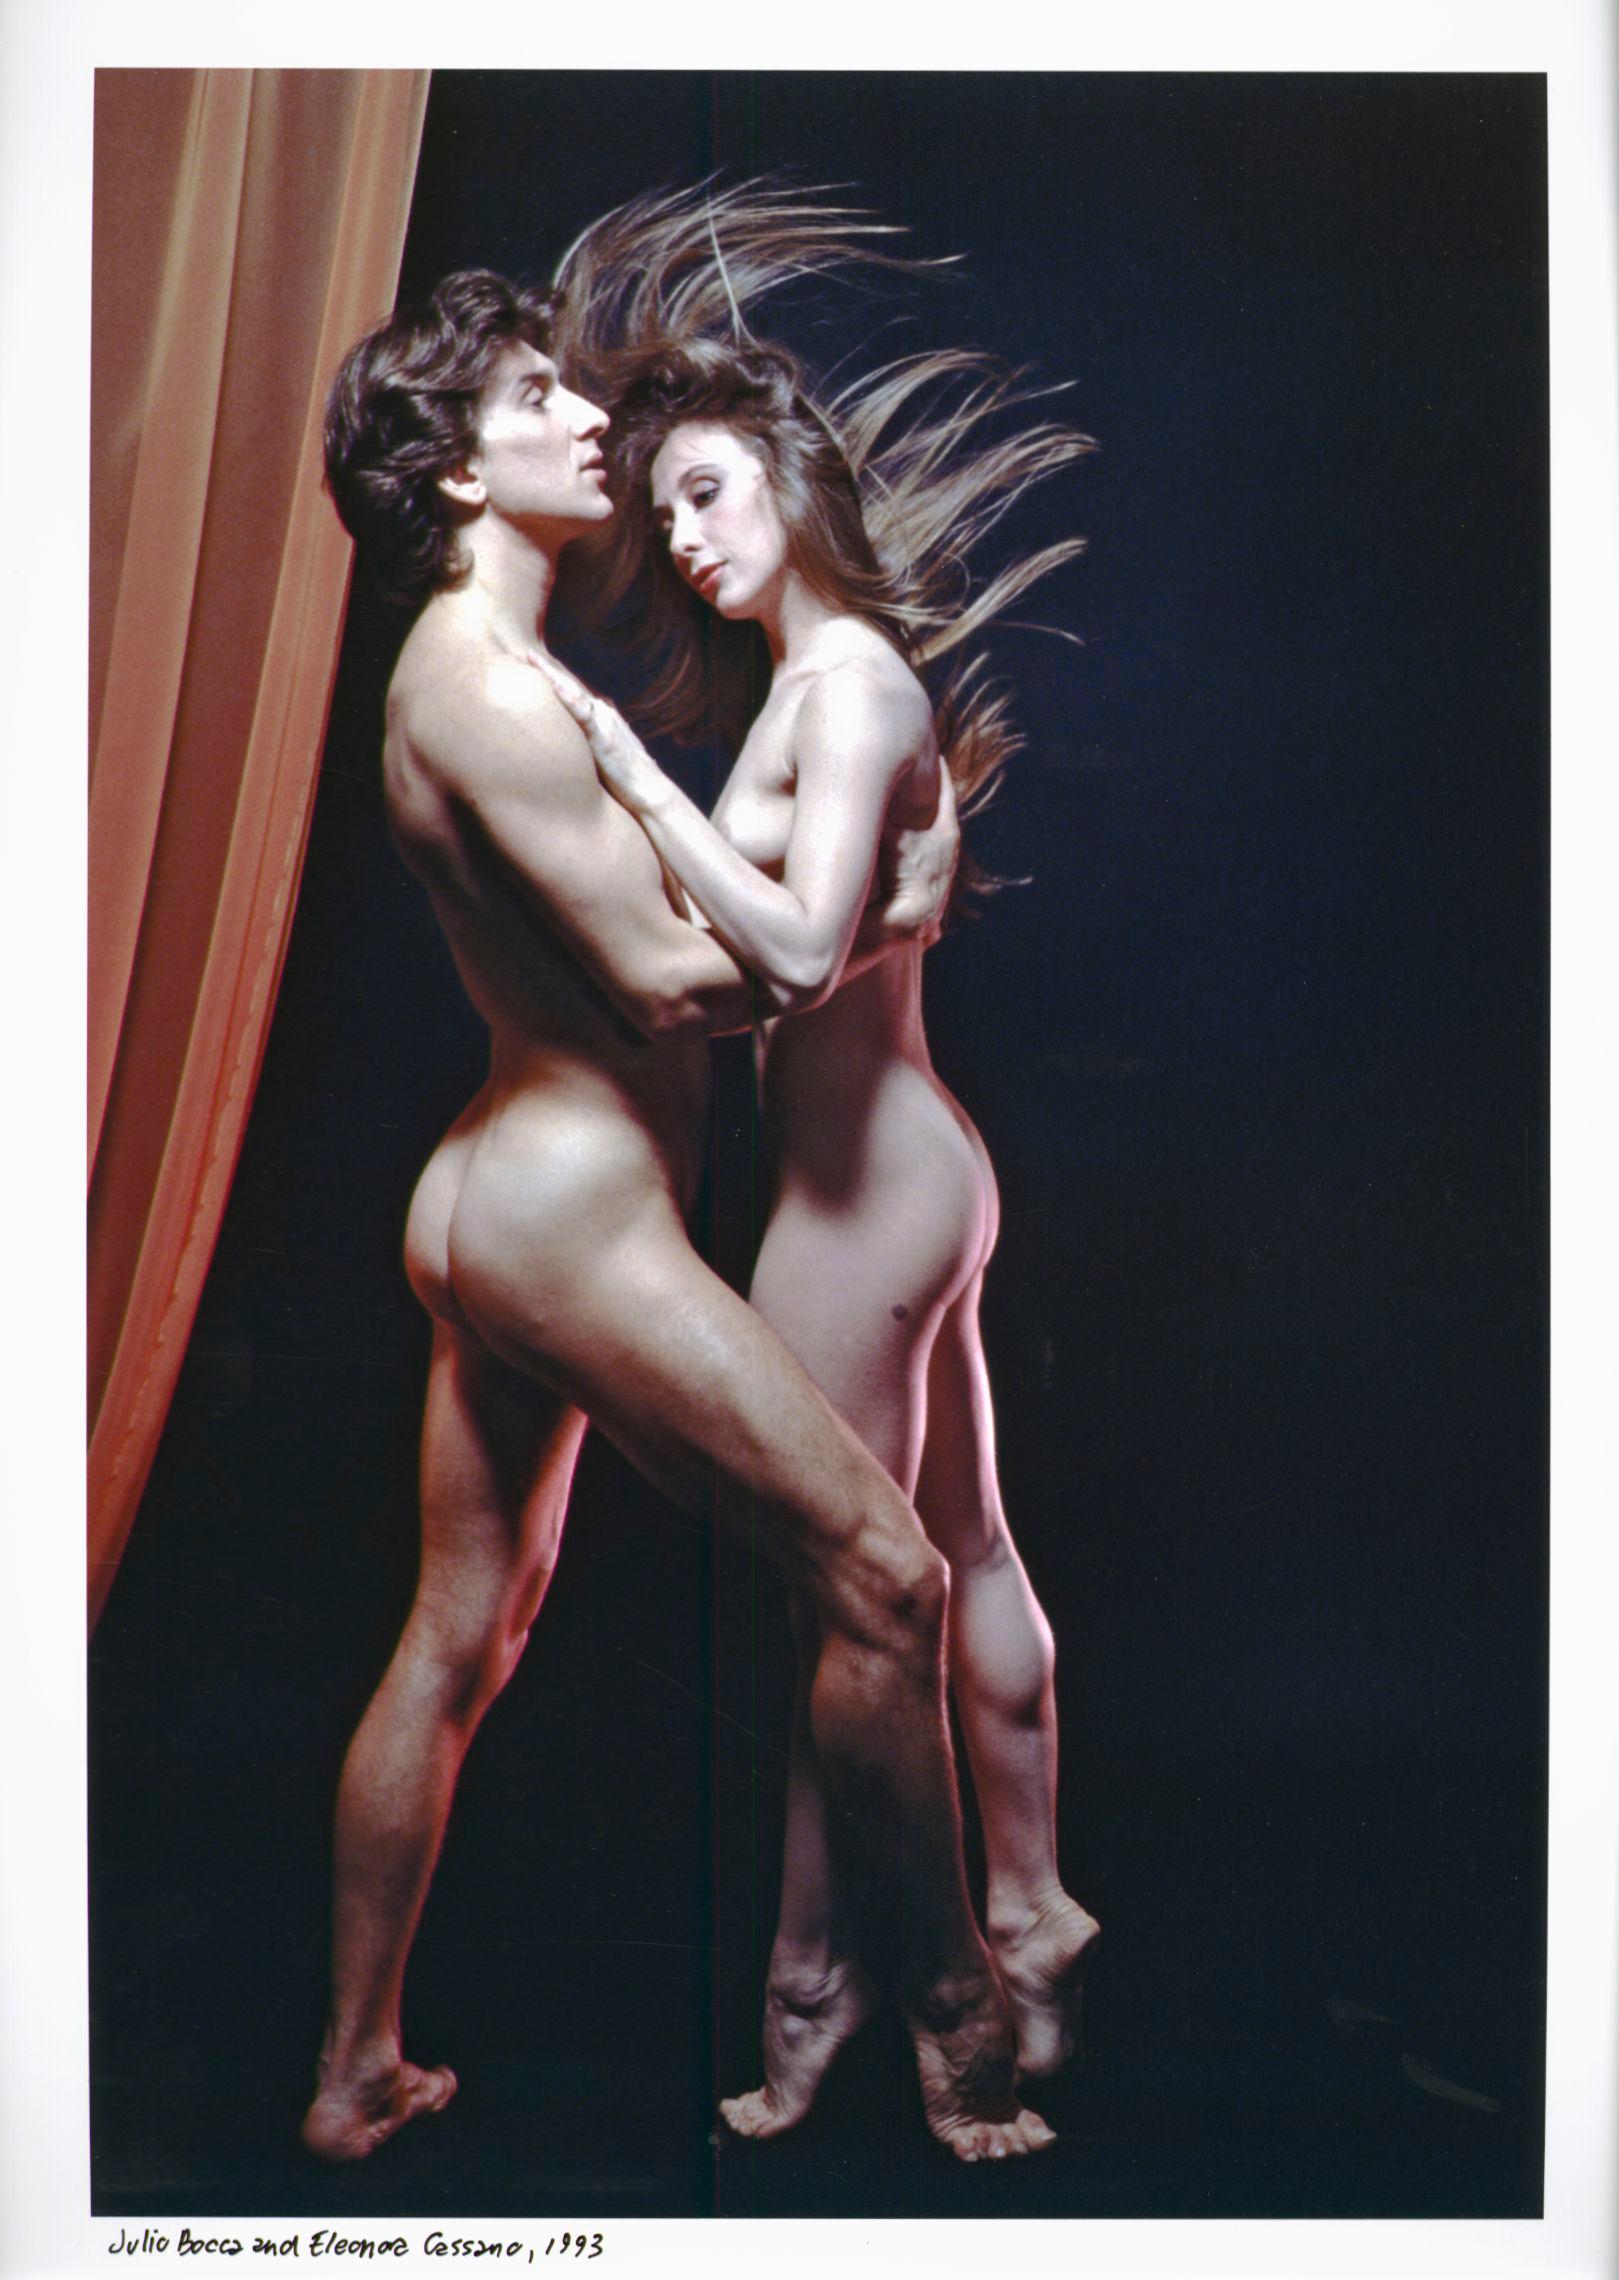 Jack Mitchell Nude Photograph - Julio Bocca and Eleonora Cassano photographed nude for Playboy